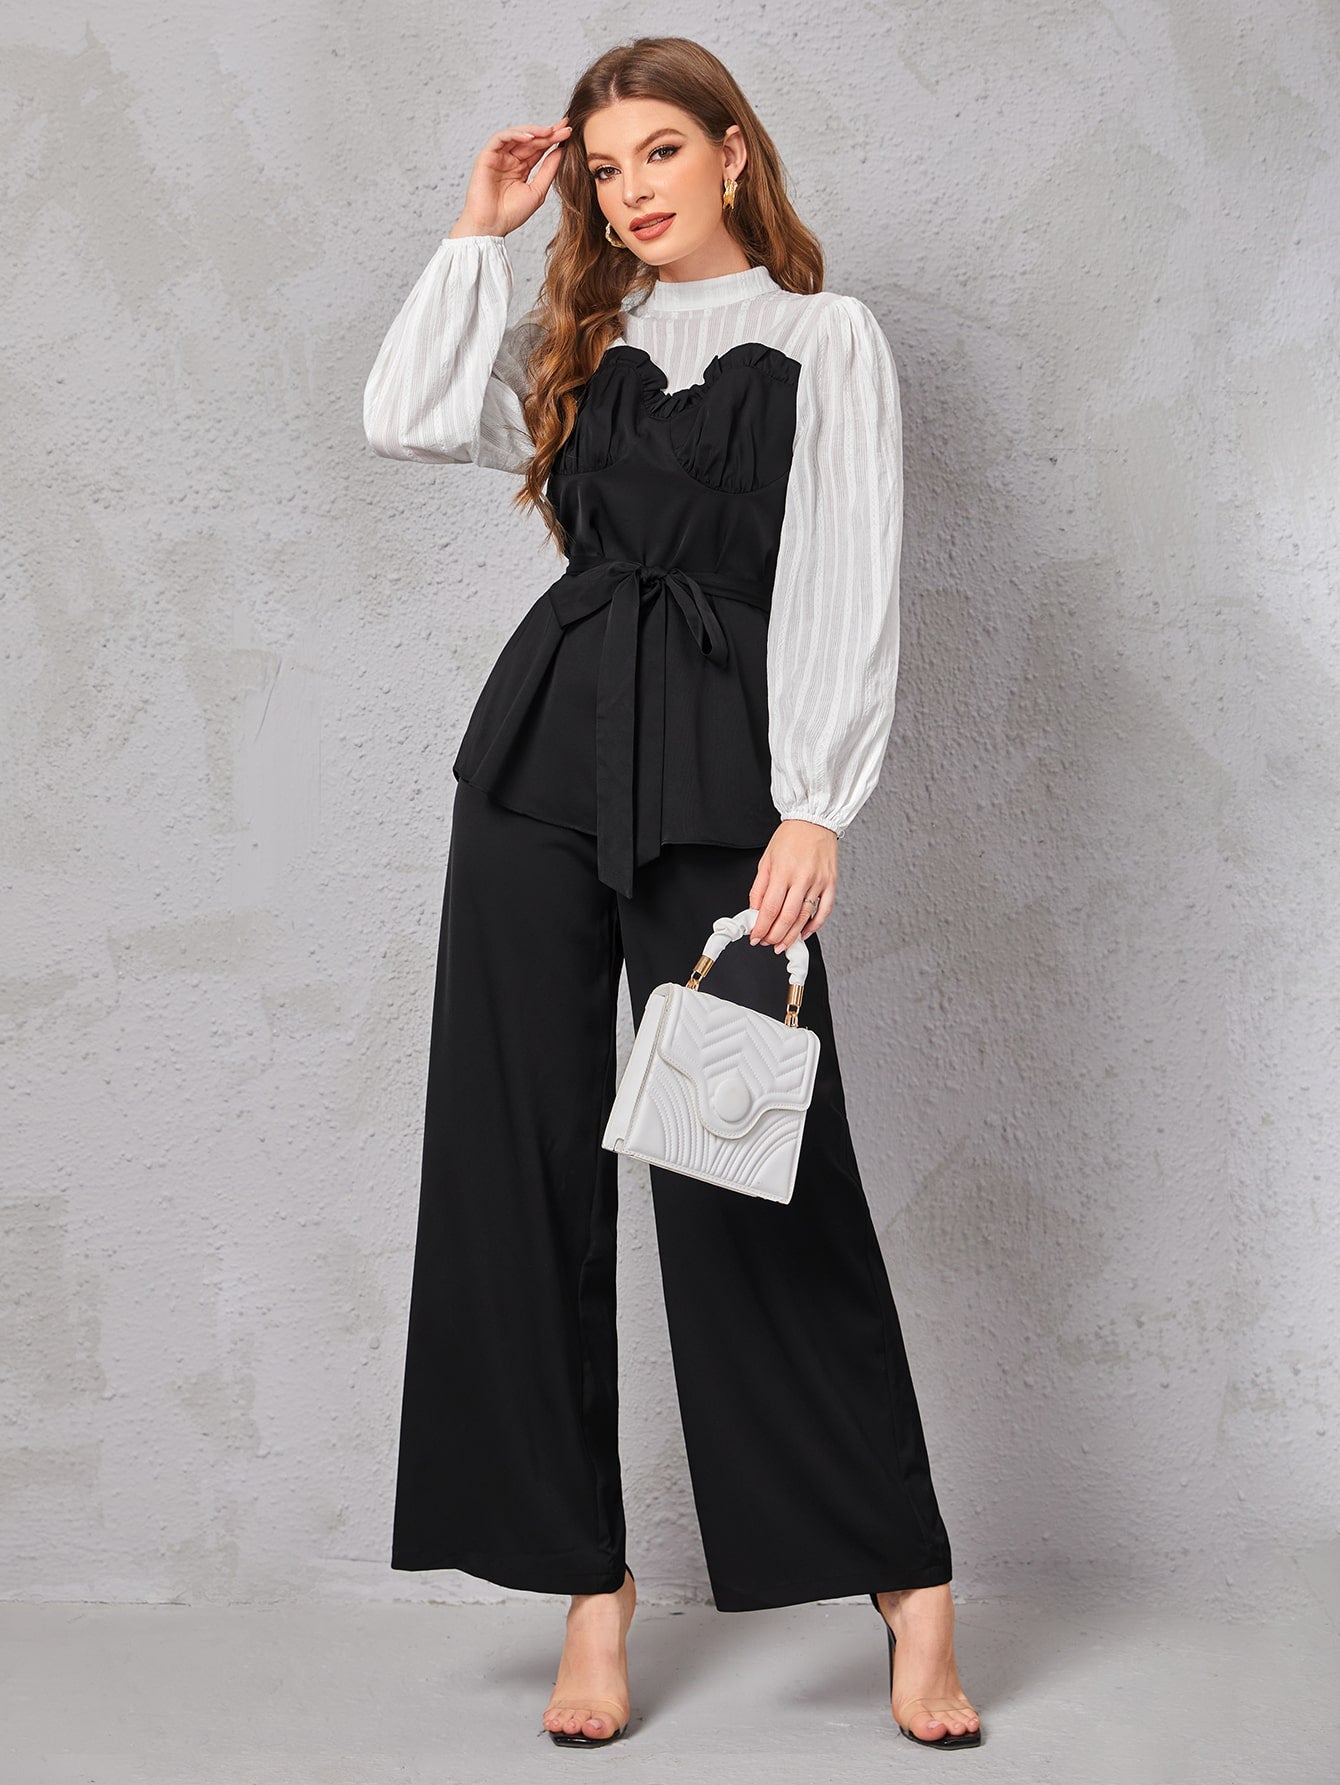 Blted frill trim 2 in 1 top and pants